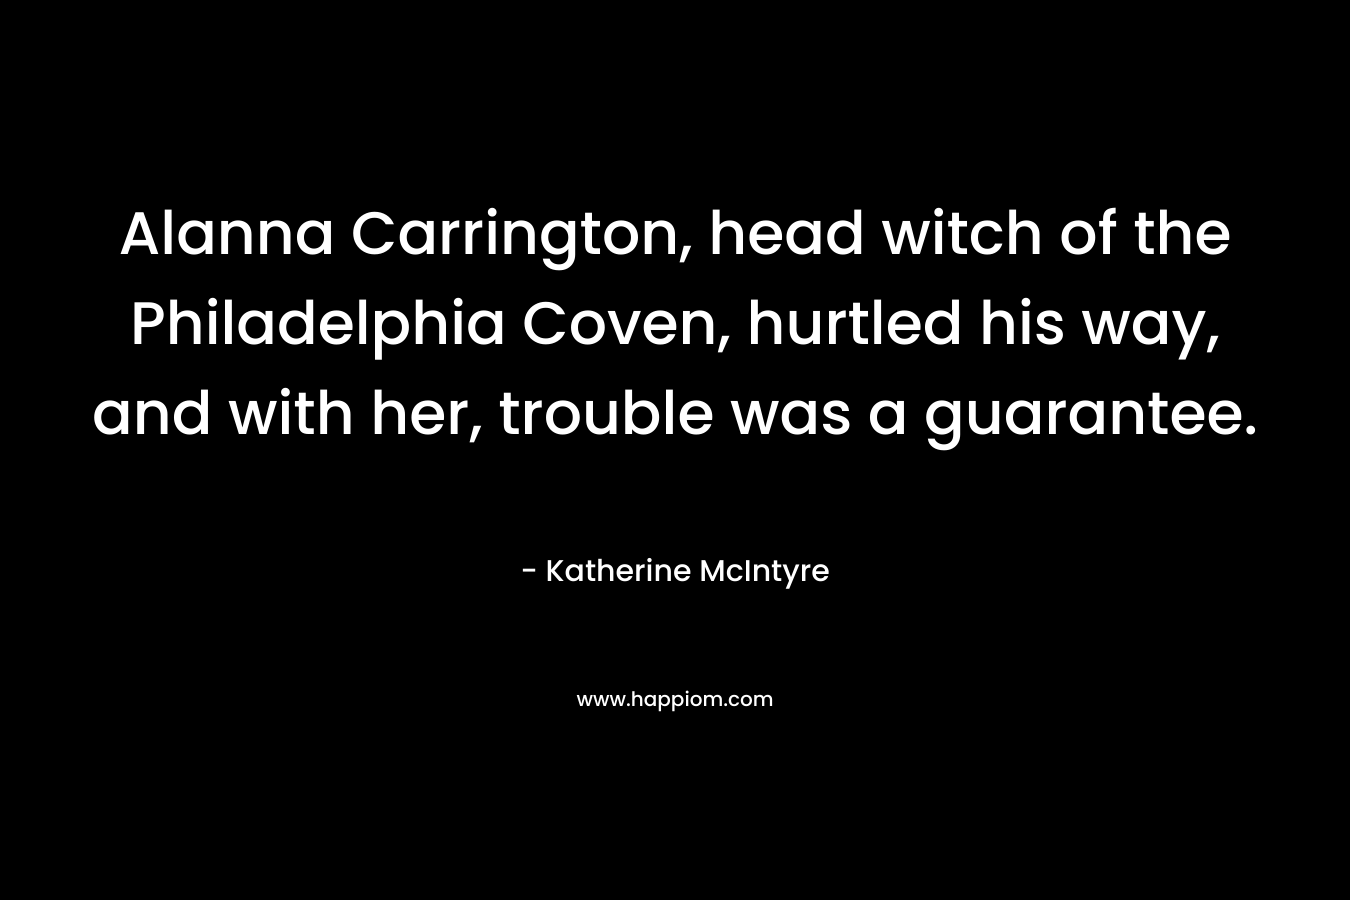 Alanna Carrington, head witch of the Philadelphia Coven, hurtled his way, and with her, trouble was a guarantee. – Katherine McIntyre